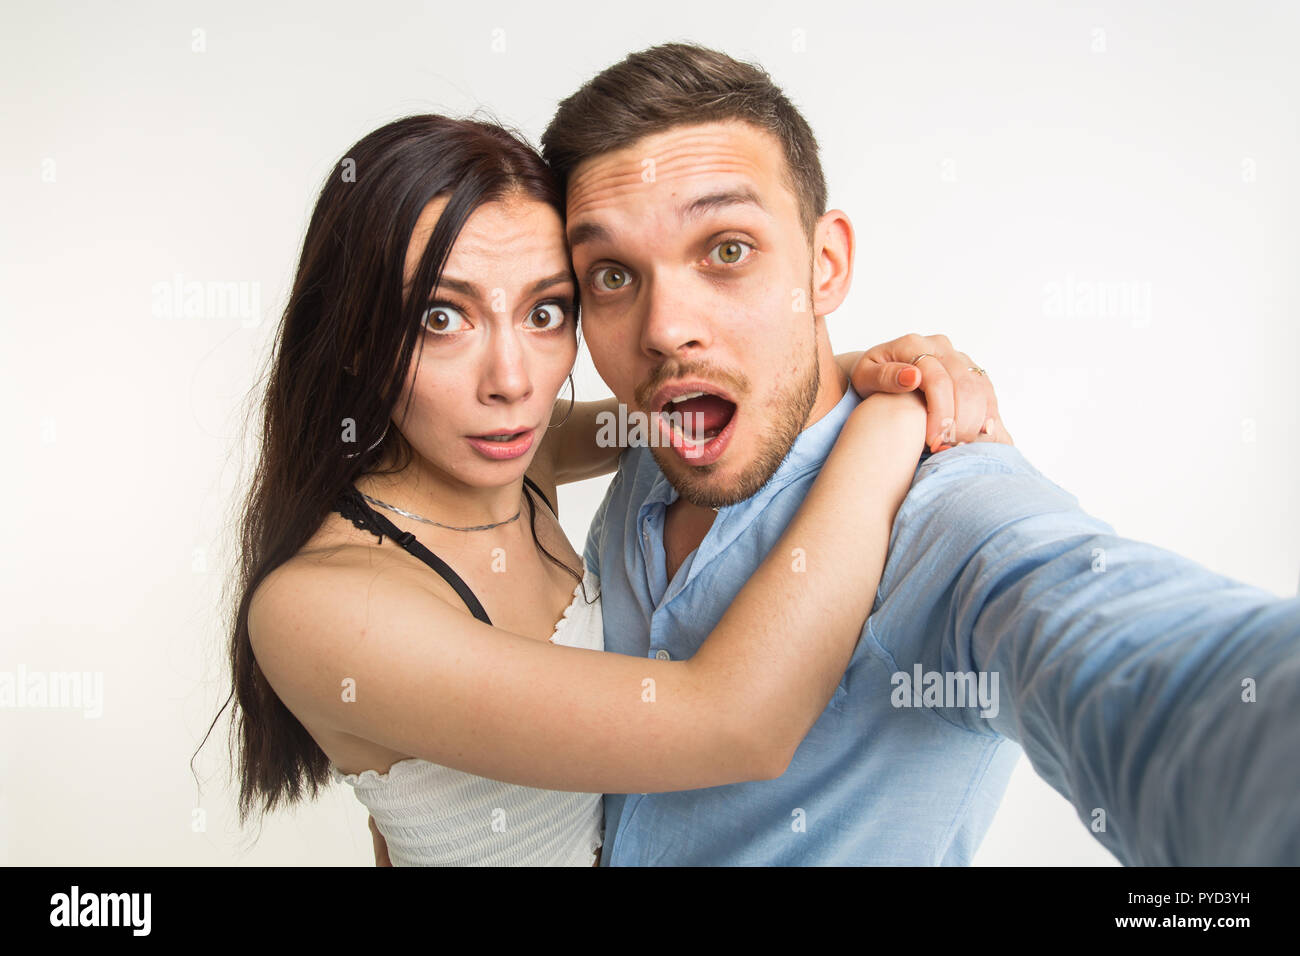 Young Happy Funny Couple Lovely Posing Stock Photo 151817678 | Shutterstock